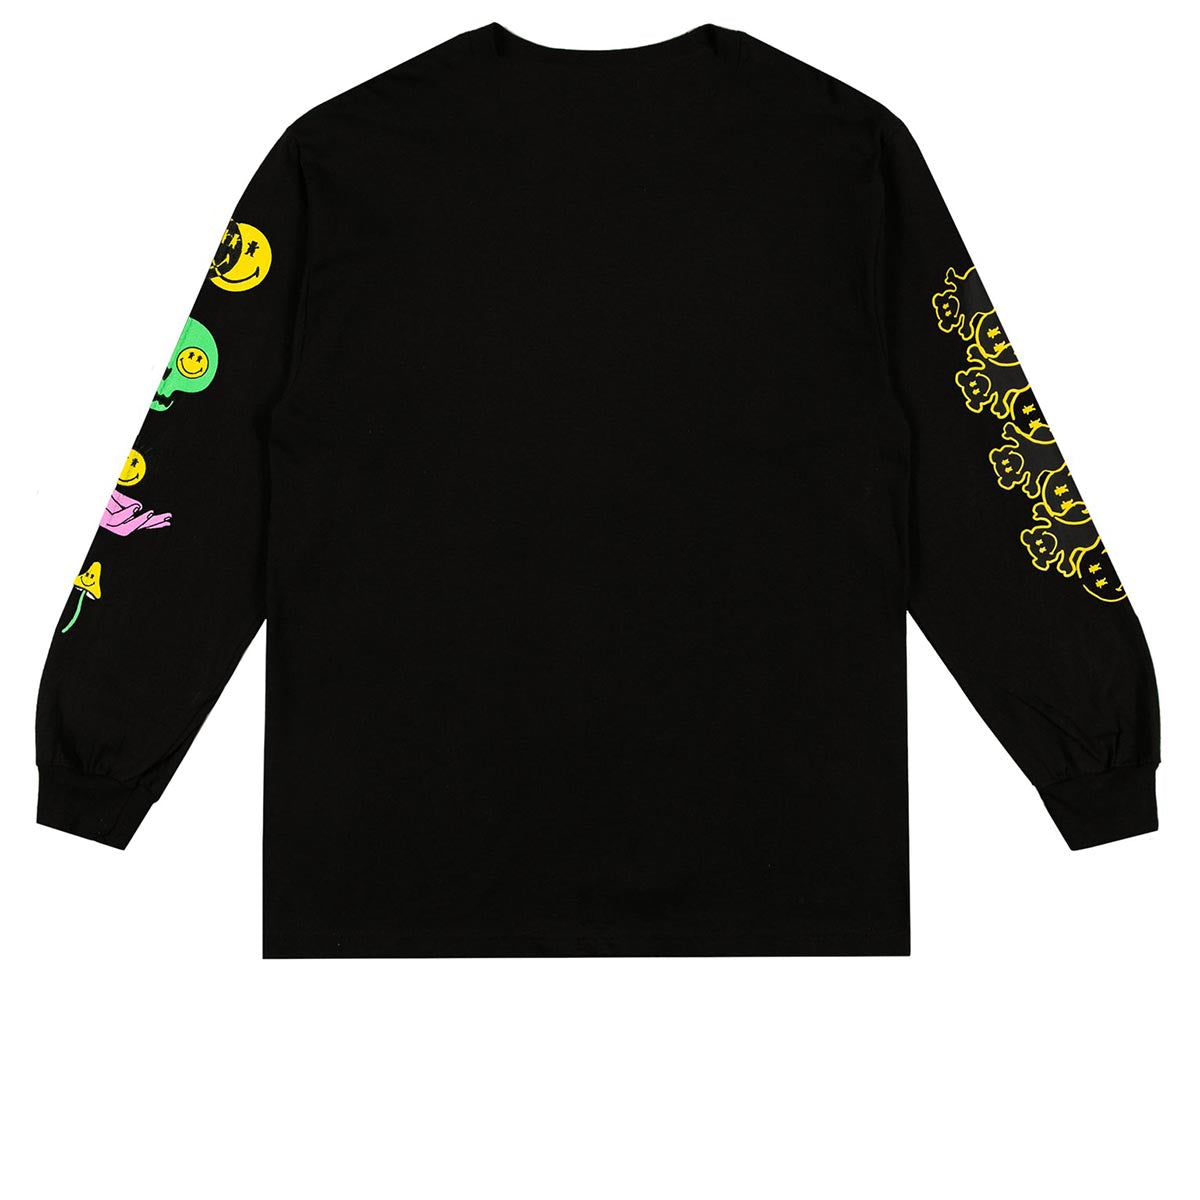 Grizzly x Smiley World Big Smile Long Sleeve T-Shirt - Black image 4